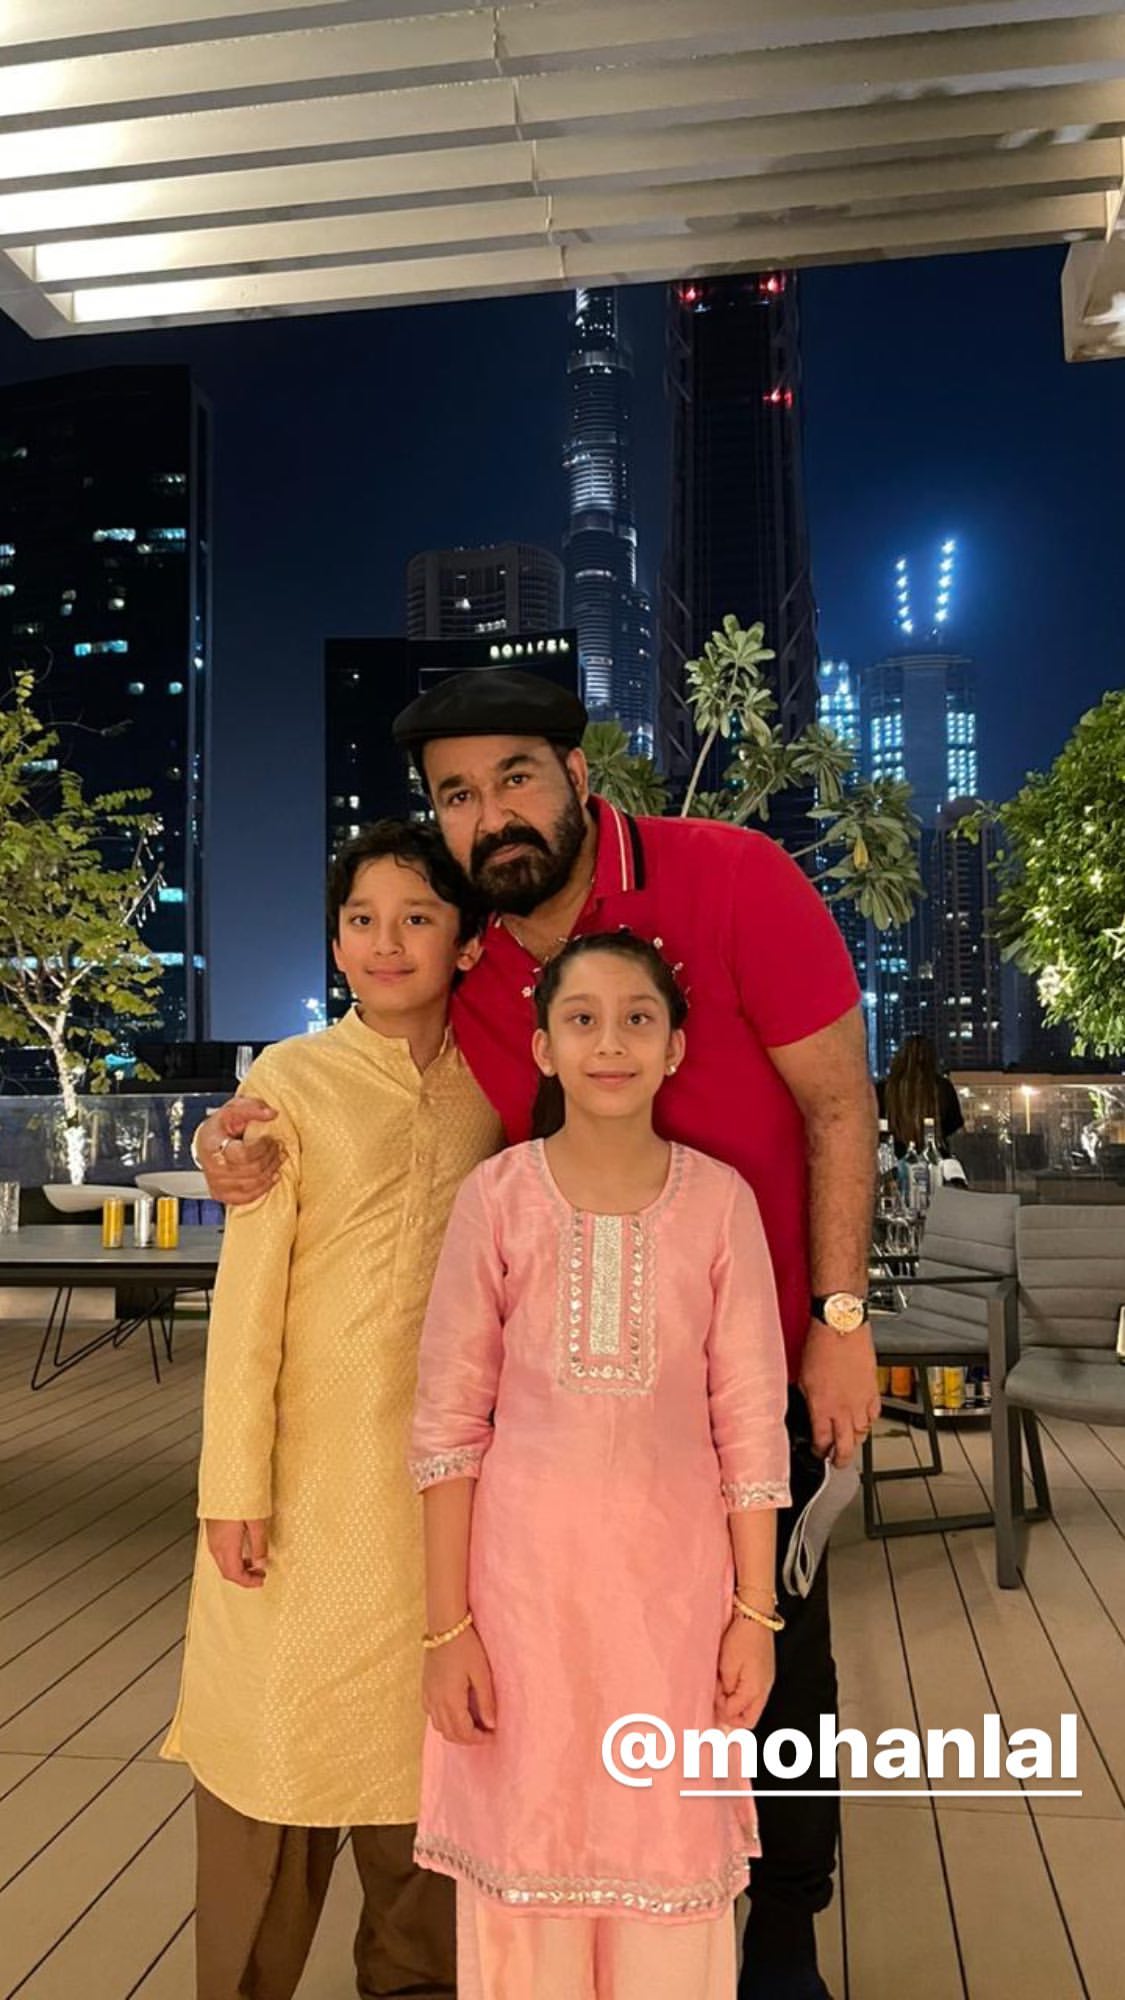 Diwali 2020: Sanjay Dutt Shares Adorable PIC With Wife Maanyata & Kids From Their Celebrations